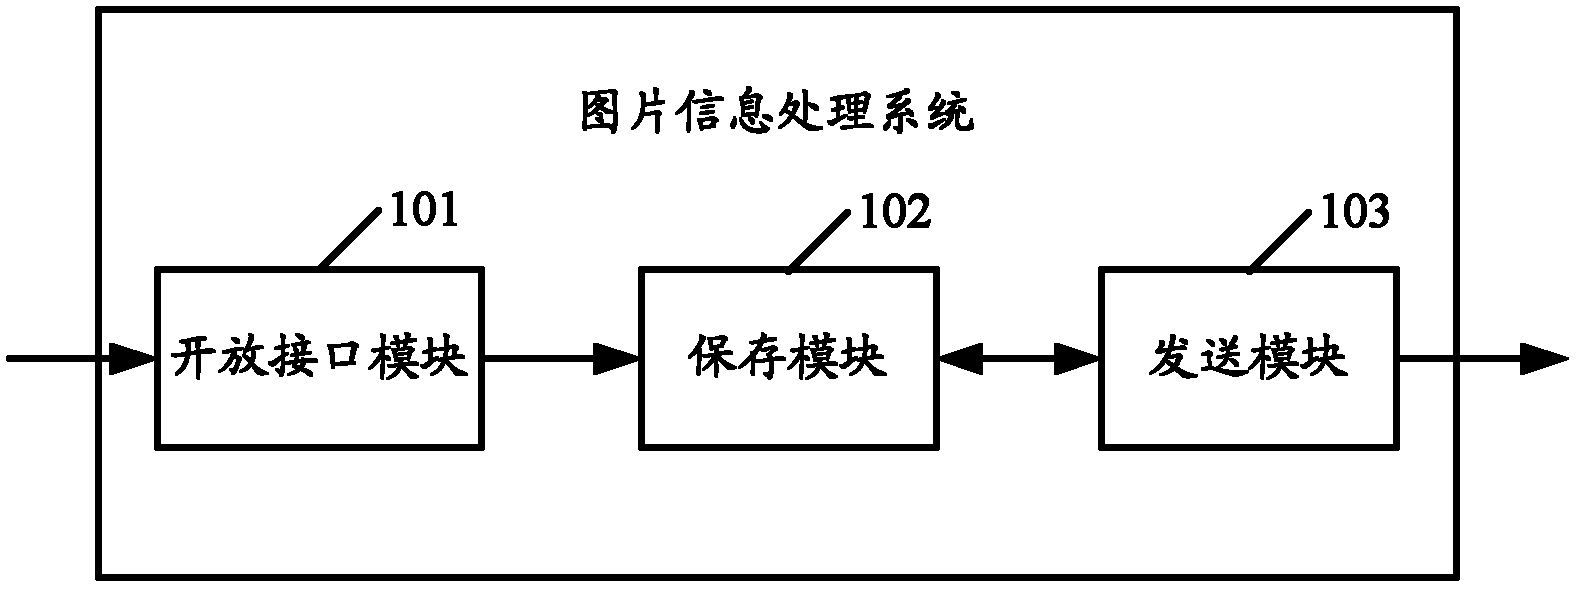 Picture information processing system and method